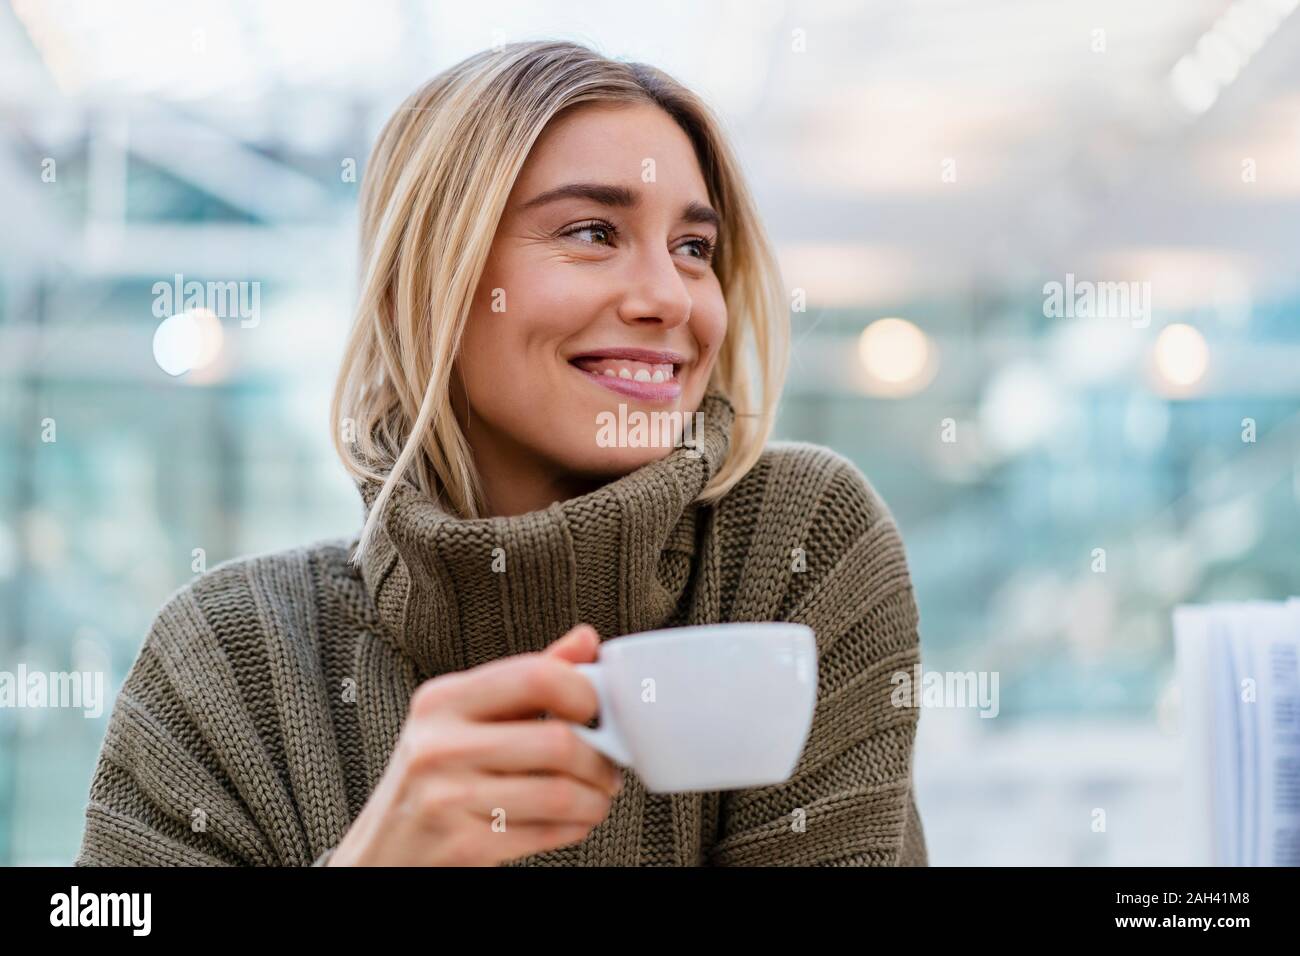 Portrait of a smiling young woman holding cup of coffee looking away Stock Photo